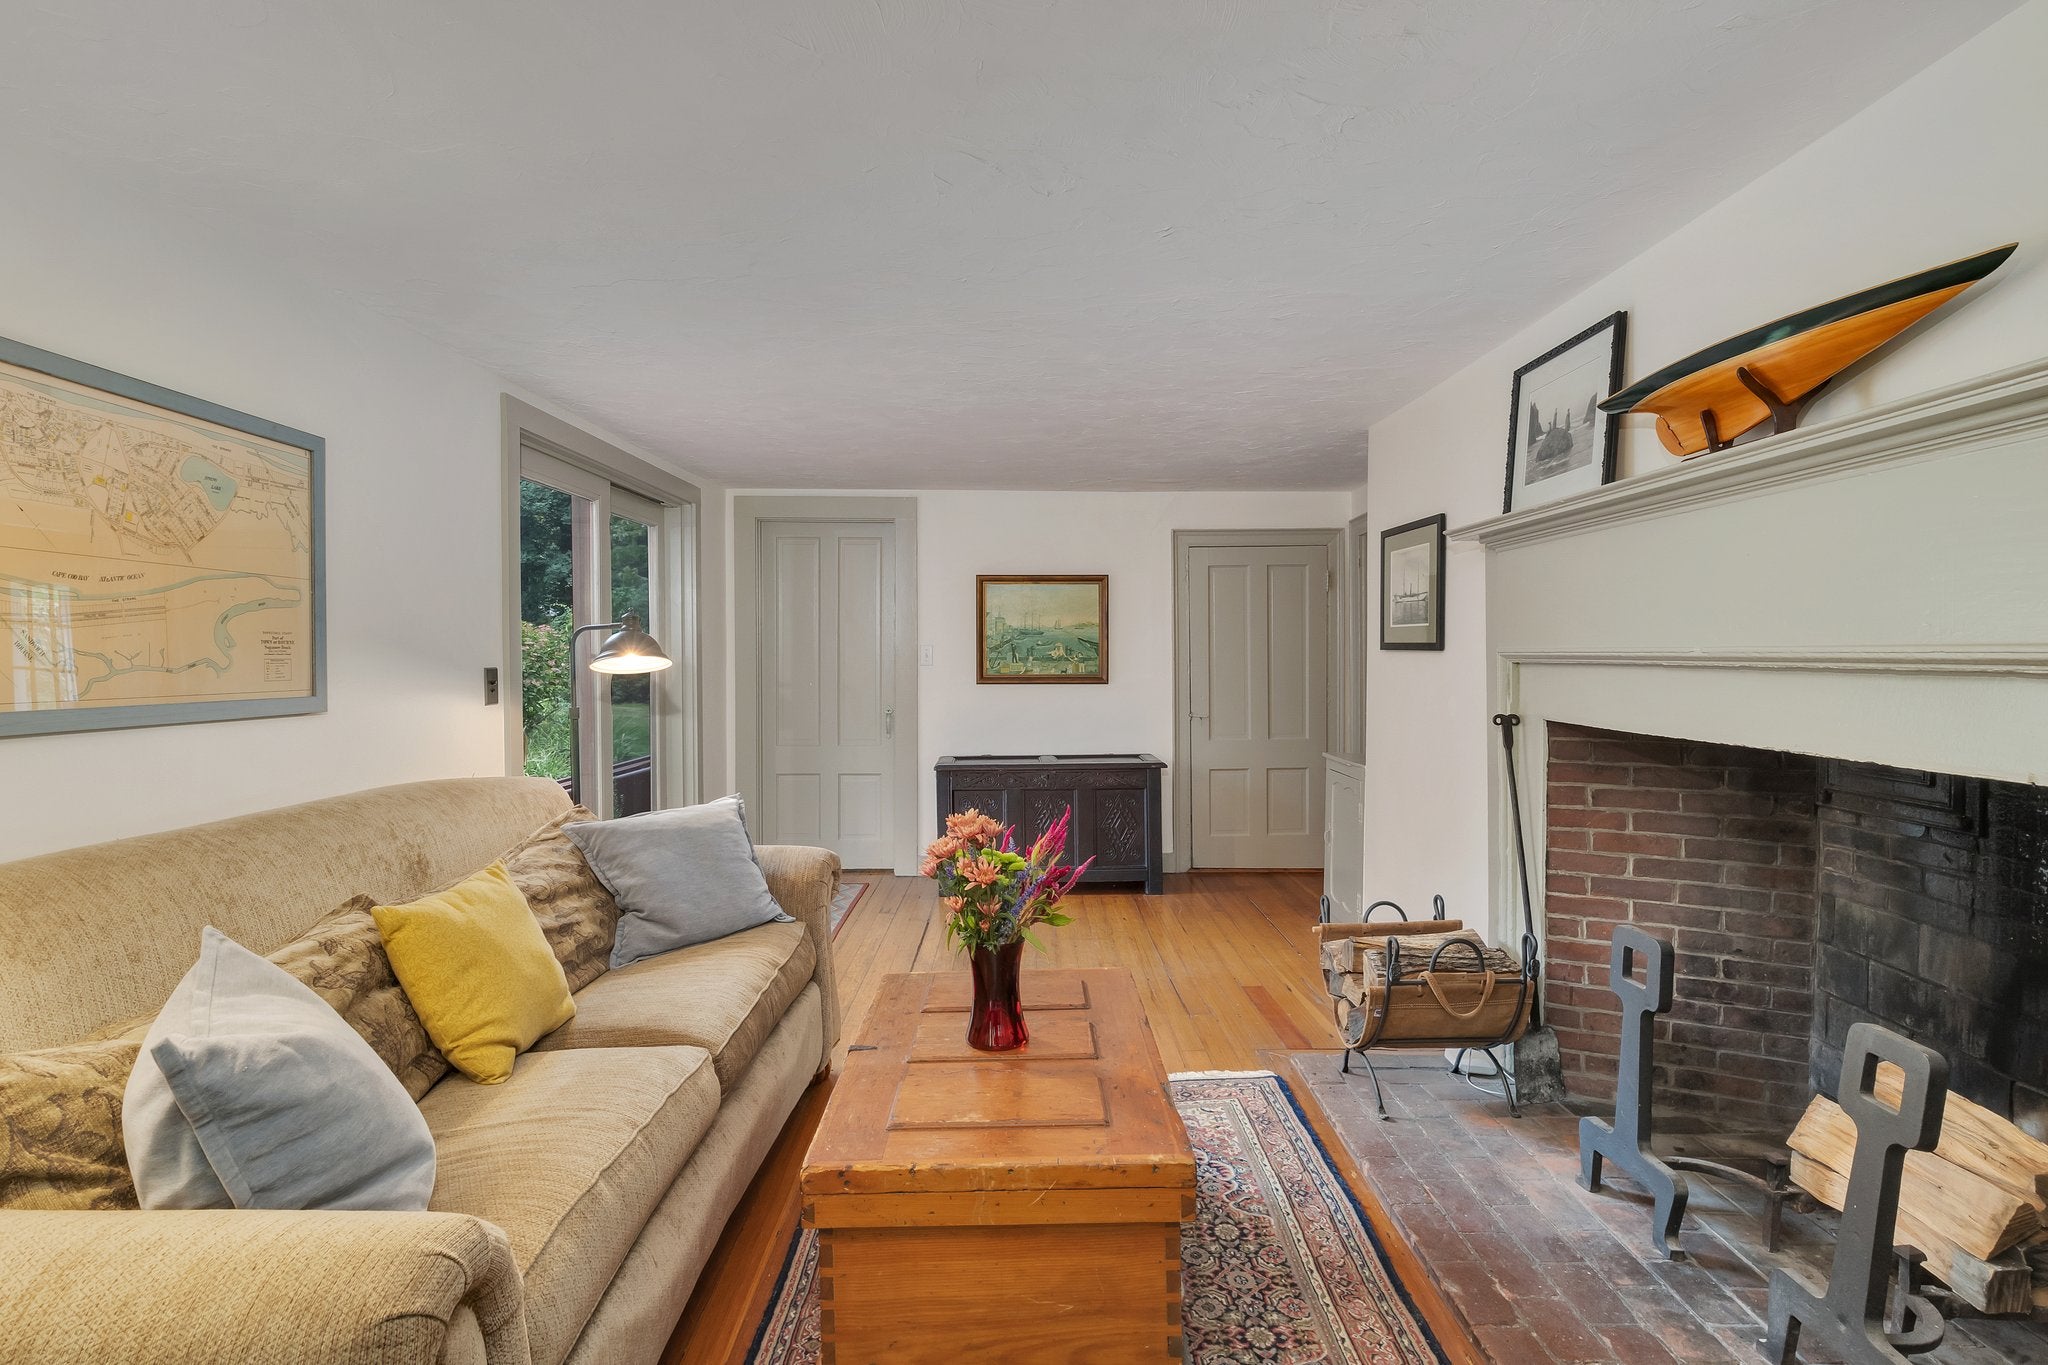 31-crowell-rd-bourne-interior